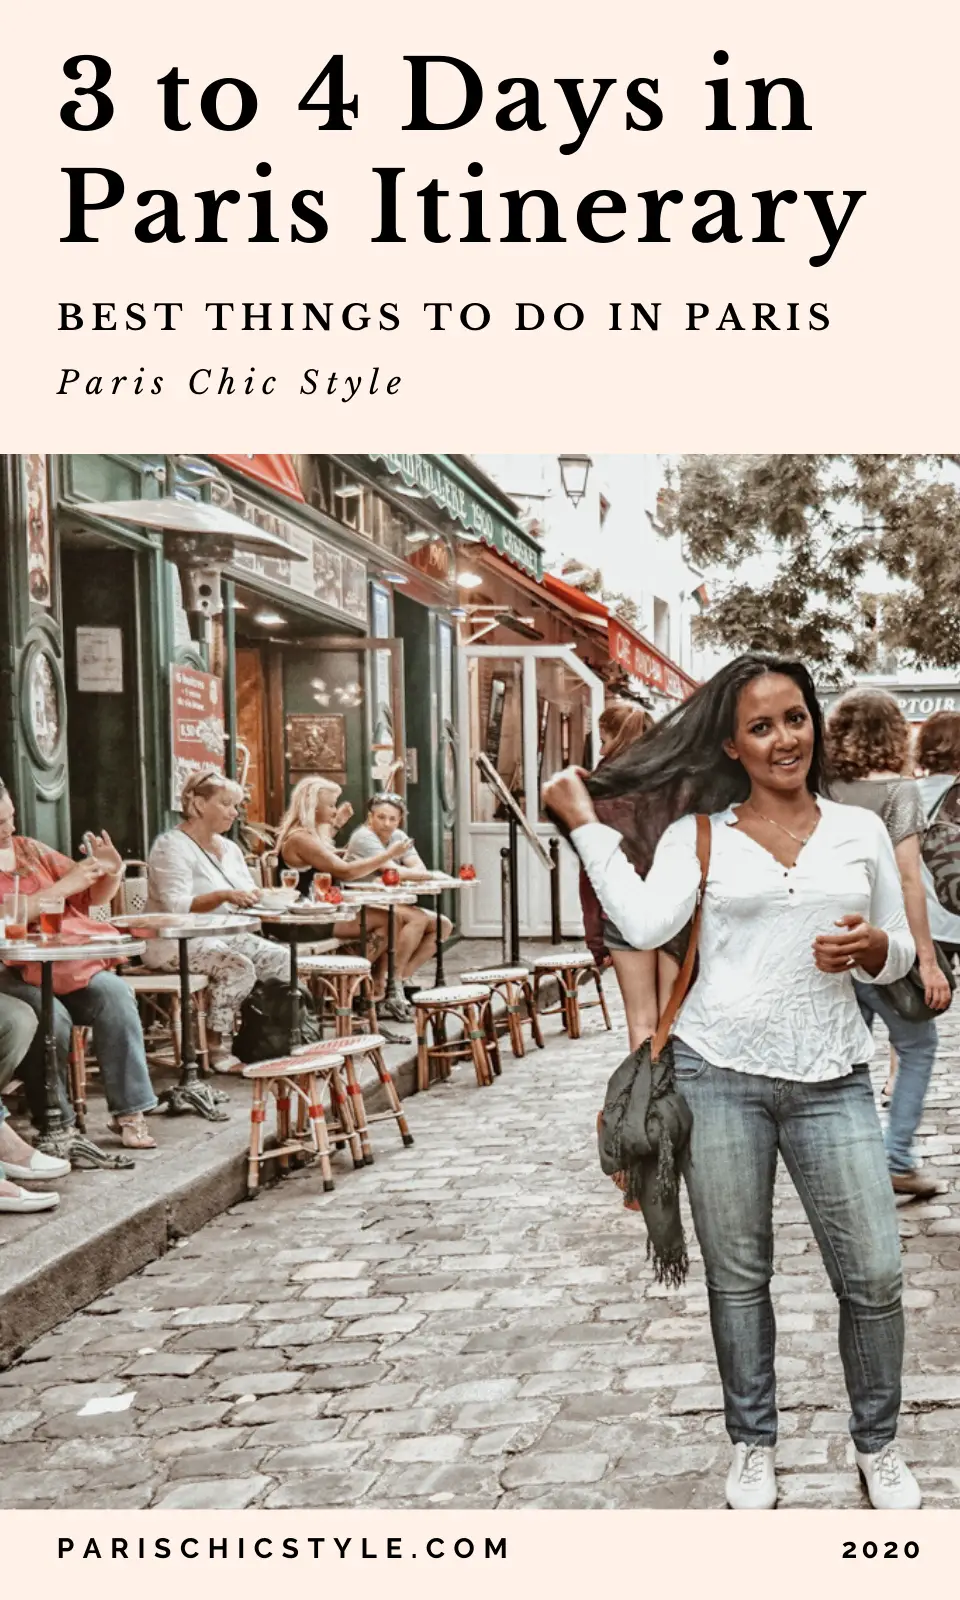 Marjolyn Lago Marj Paris Chic Style 3 to 4 days in Paris Itinerary travel guide